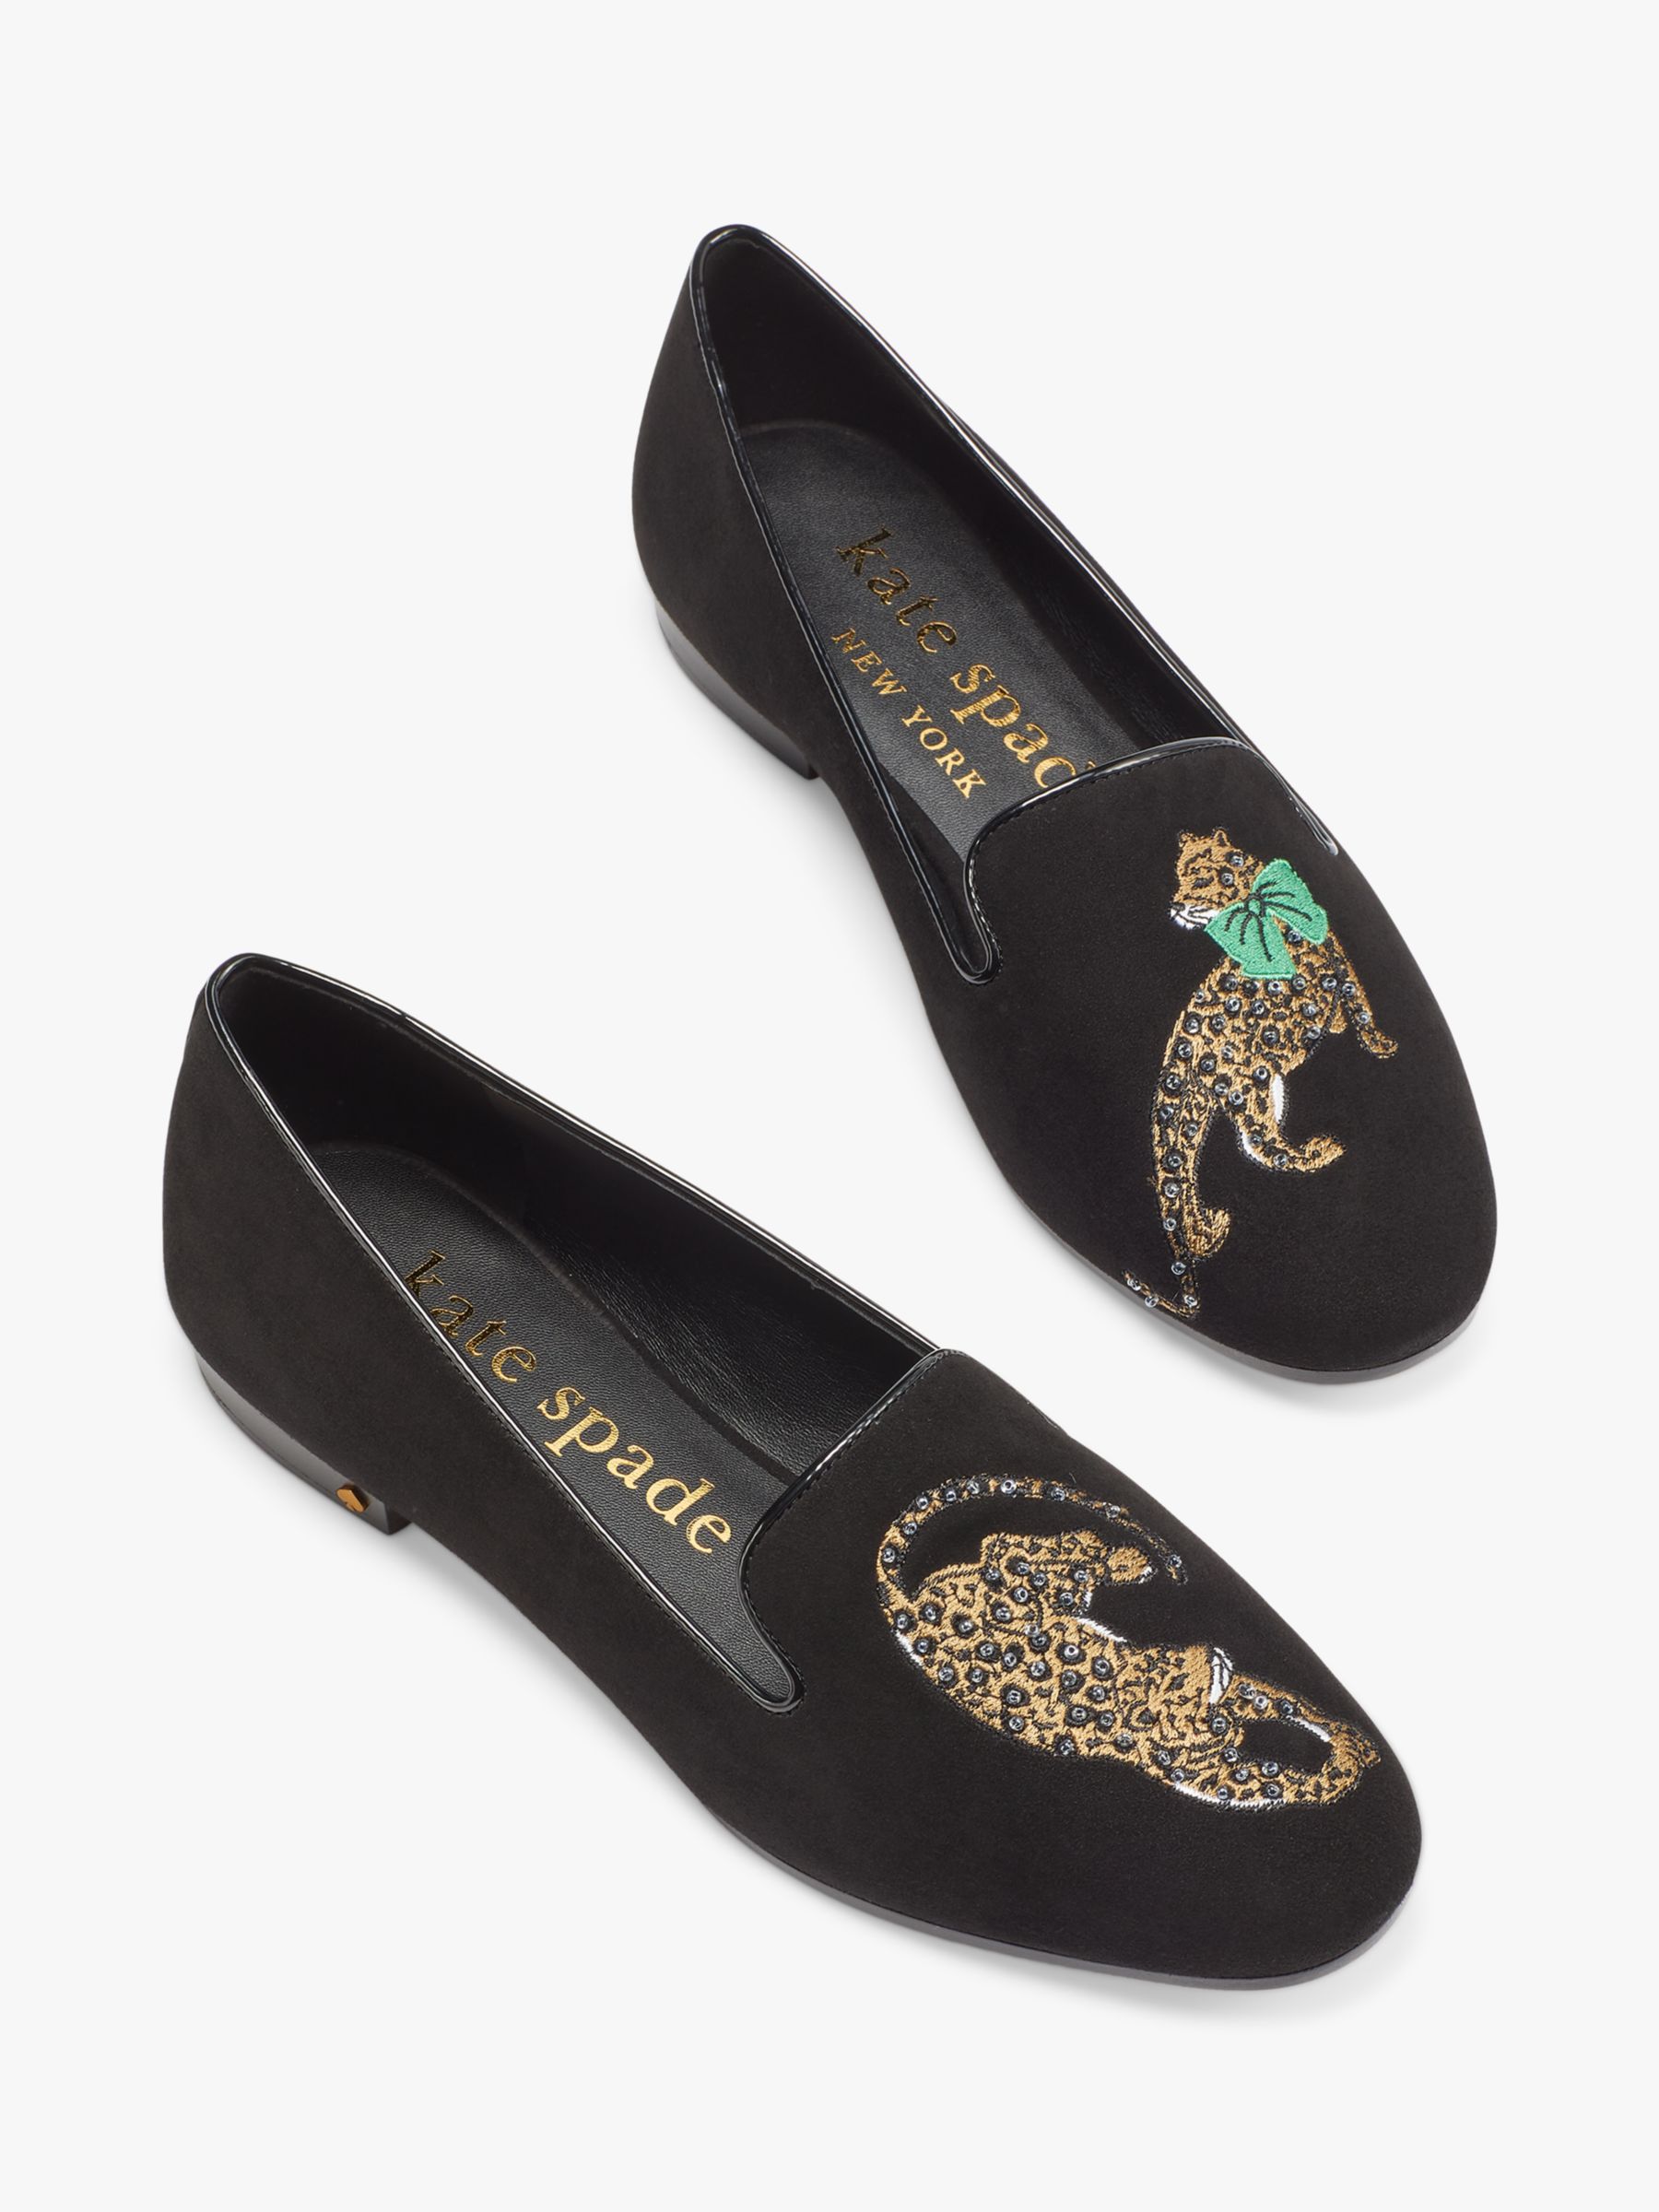 kate spade new york Lounge Suede Loafers, Black